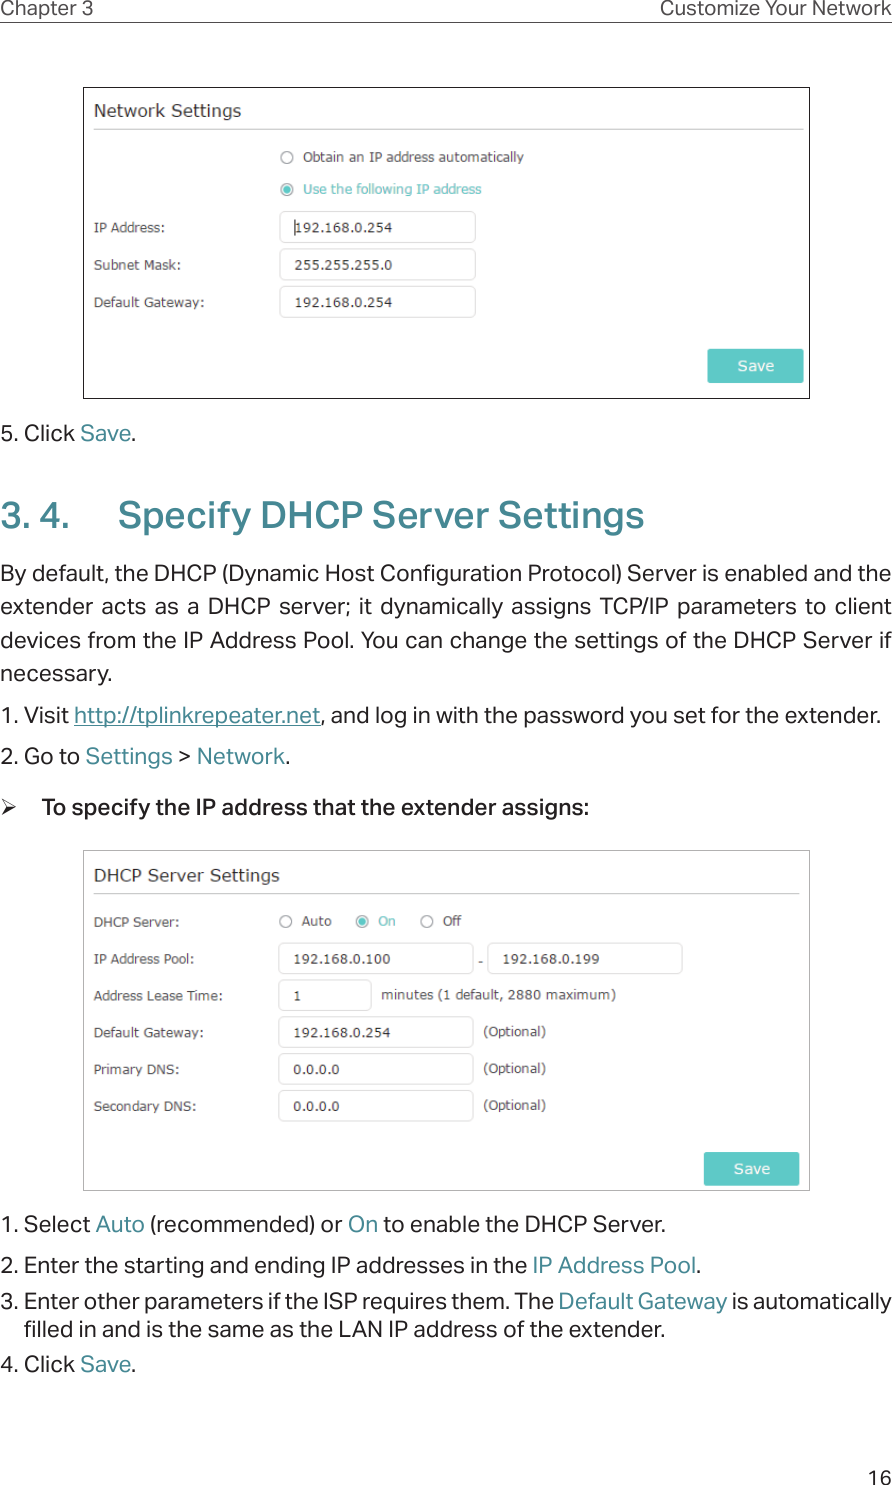 16Chapter 3 Customize Your Network5. Click Save. 3. 4.  Specify DHCP Server SettingsBy default, the DHCP (Dynamic Host Configuration Protocol) Server is enabled and the extender acts as a DHCP server; it dynamically assigns TCP/IP parameters to client devices from the IP Address Pool. You can change the settings of the DHCP Server if necessary.1. Visit http://tplinkrepeater.net, and log in with the password you set for the extender.2. Go to Settings &gt; Network. ¾To specify the IP address that the extender assigns:1. Select Auto (recommended) or On to enable the DHCP Server.2. Enter the starting and ending IP addresses in the IP Address Pool.3. Enter other parameters if the ISP requires them. The Default Gateway is automatically filled in and is the same as the LAN IP address of the extender.4. Click Save.